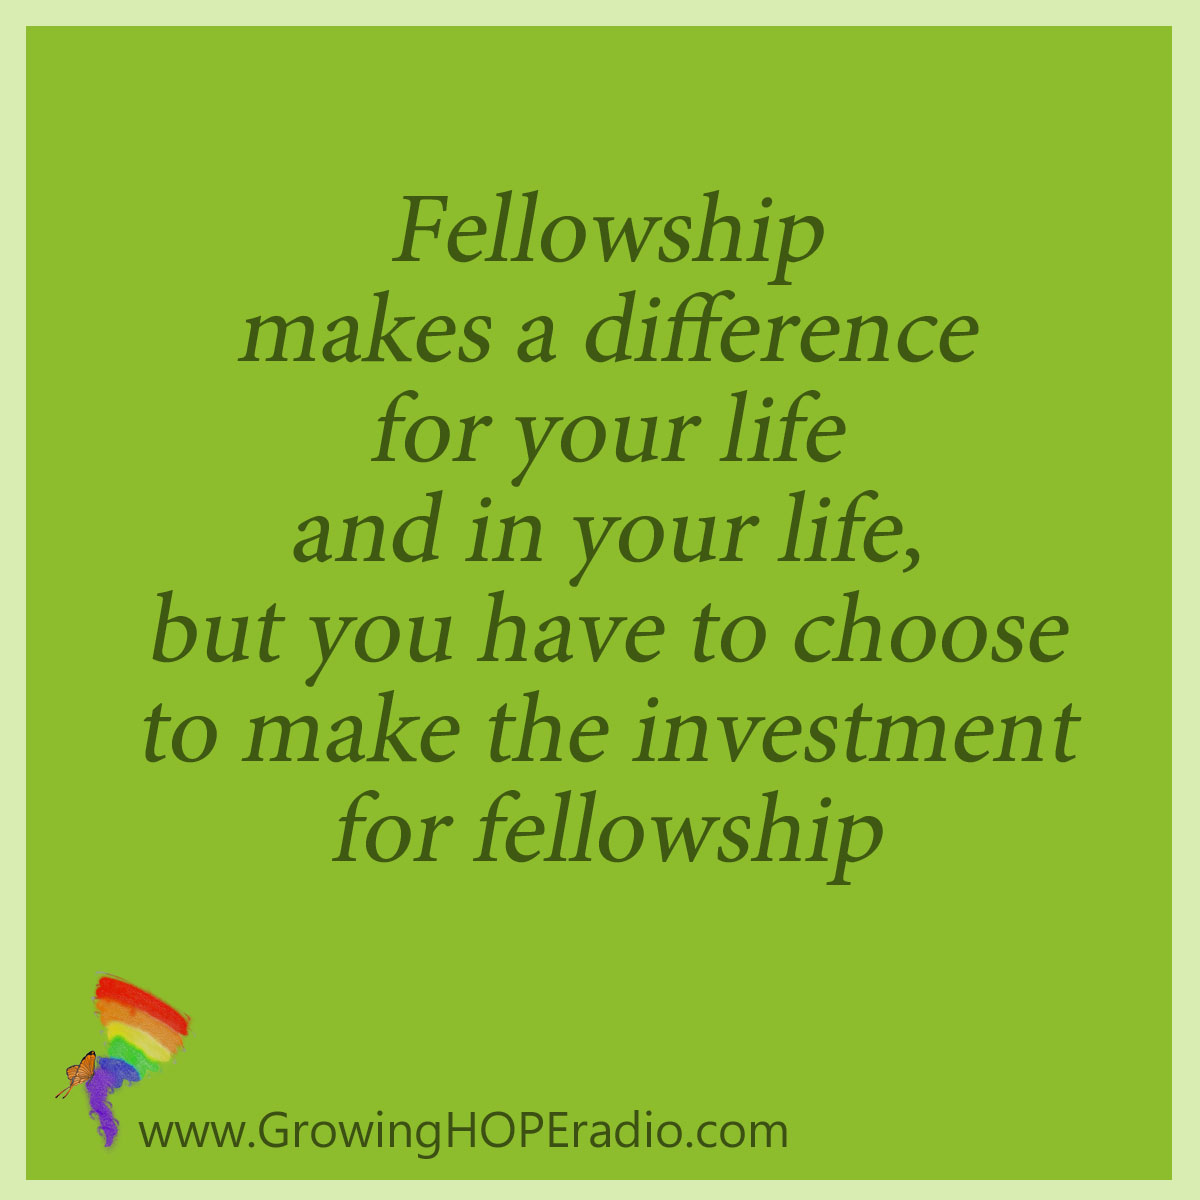 Growing HOPE Daily - quote - fellowship makes a difference